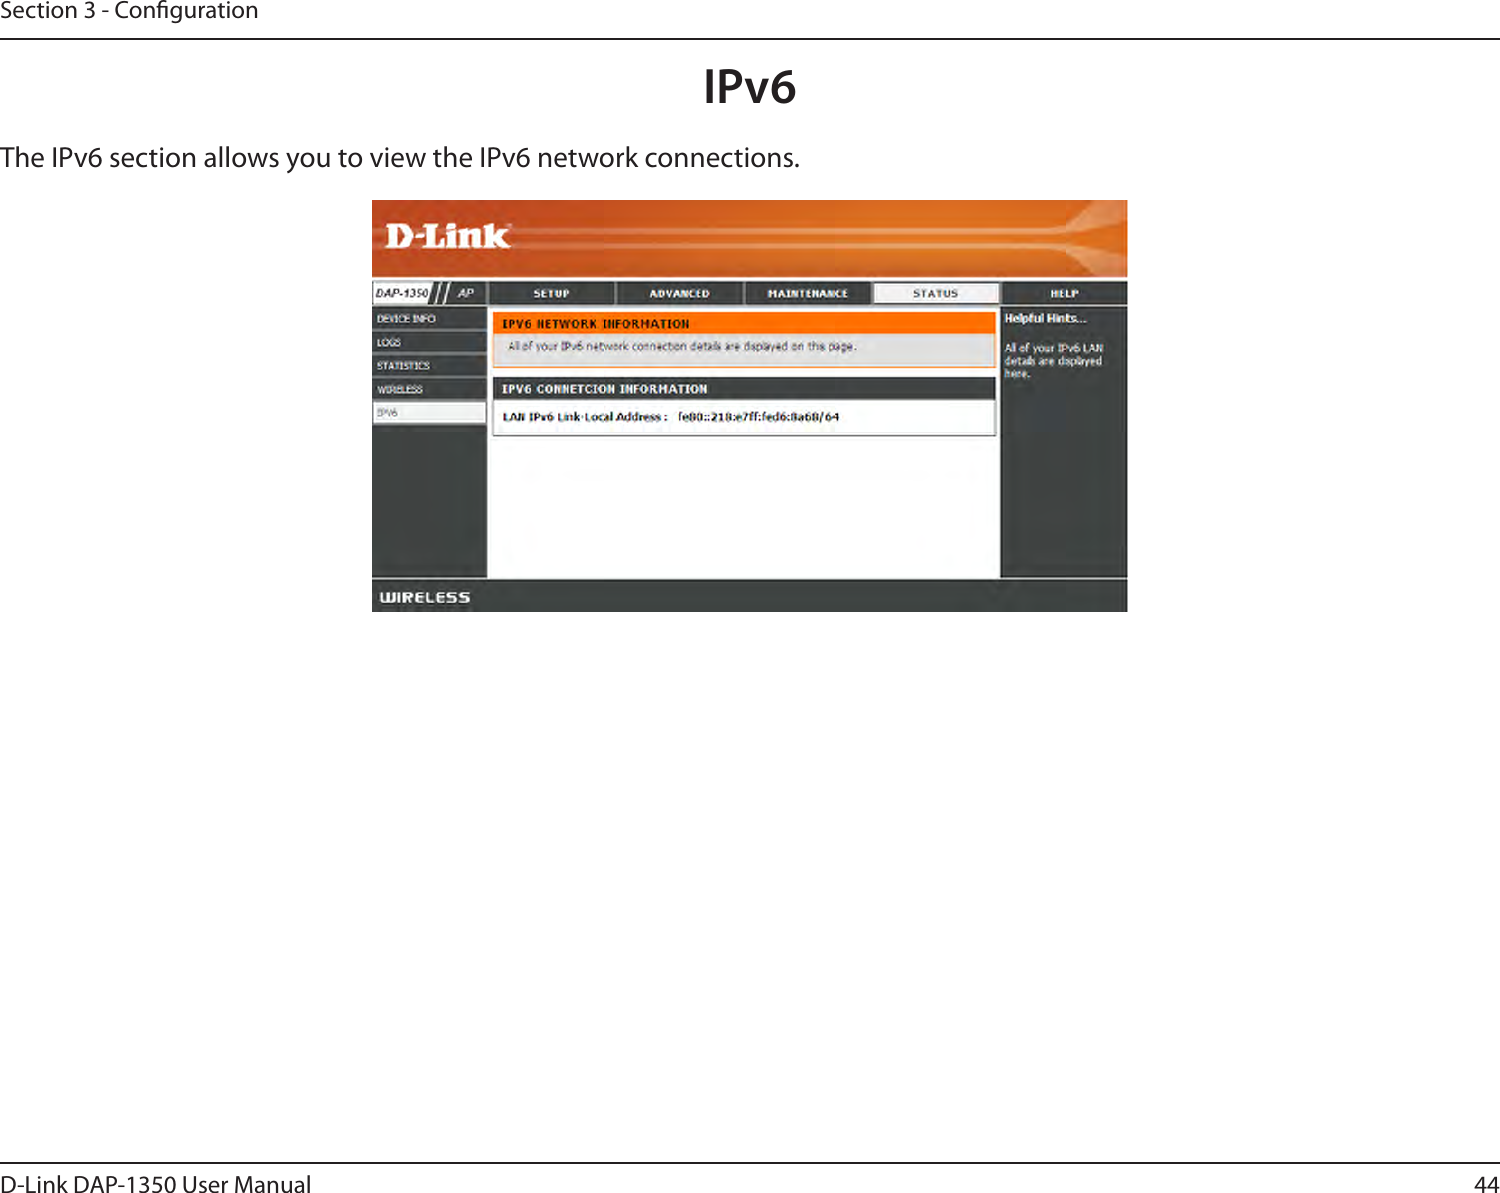 44D-Link DAP-1350 User ManualSection 3 - CongurationIPv6The IPv6 section allows you to view the IPv6 network connections.